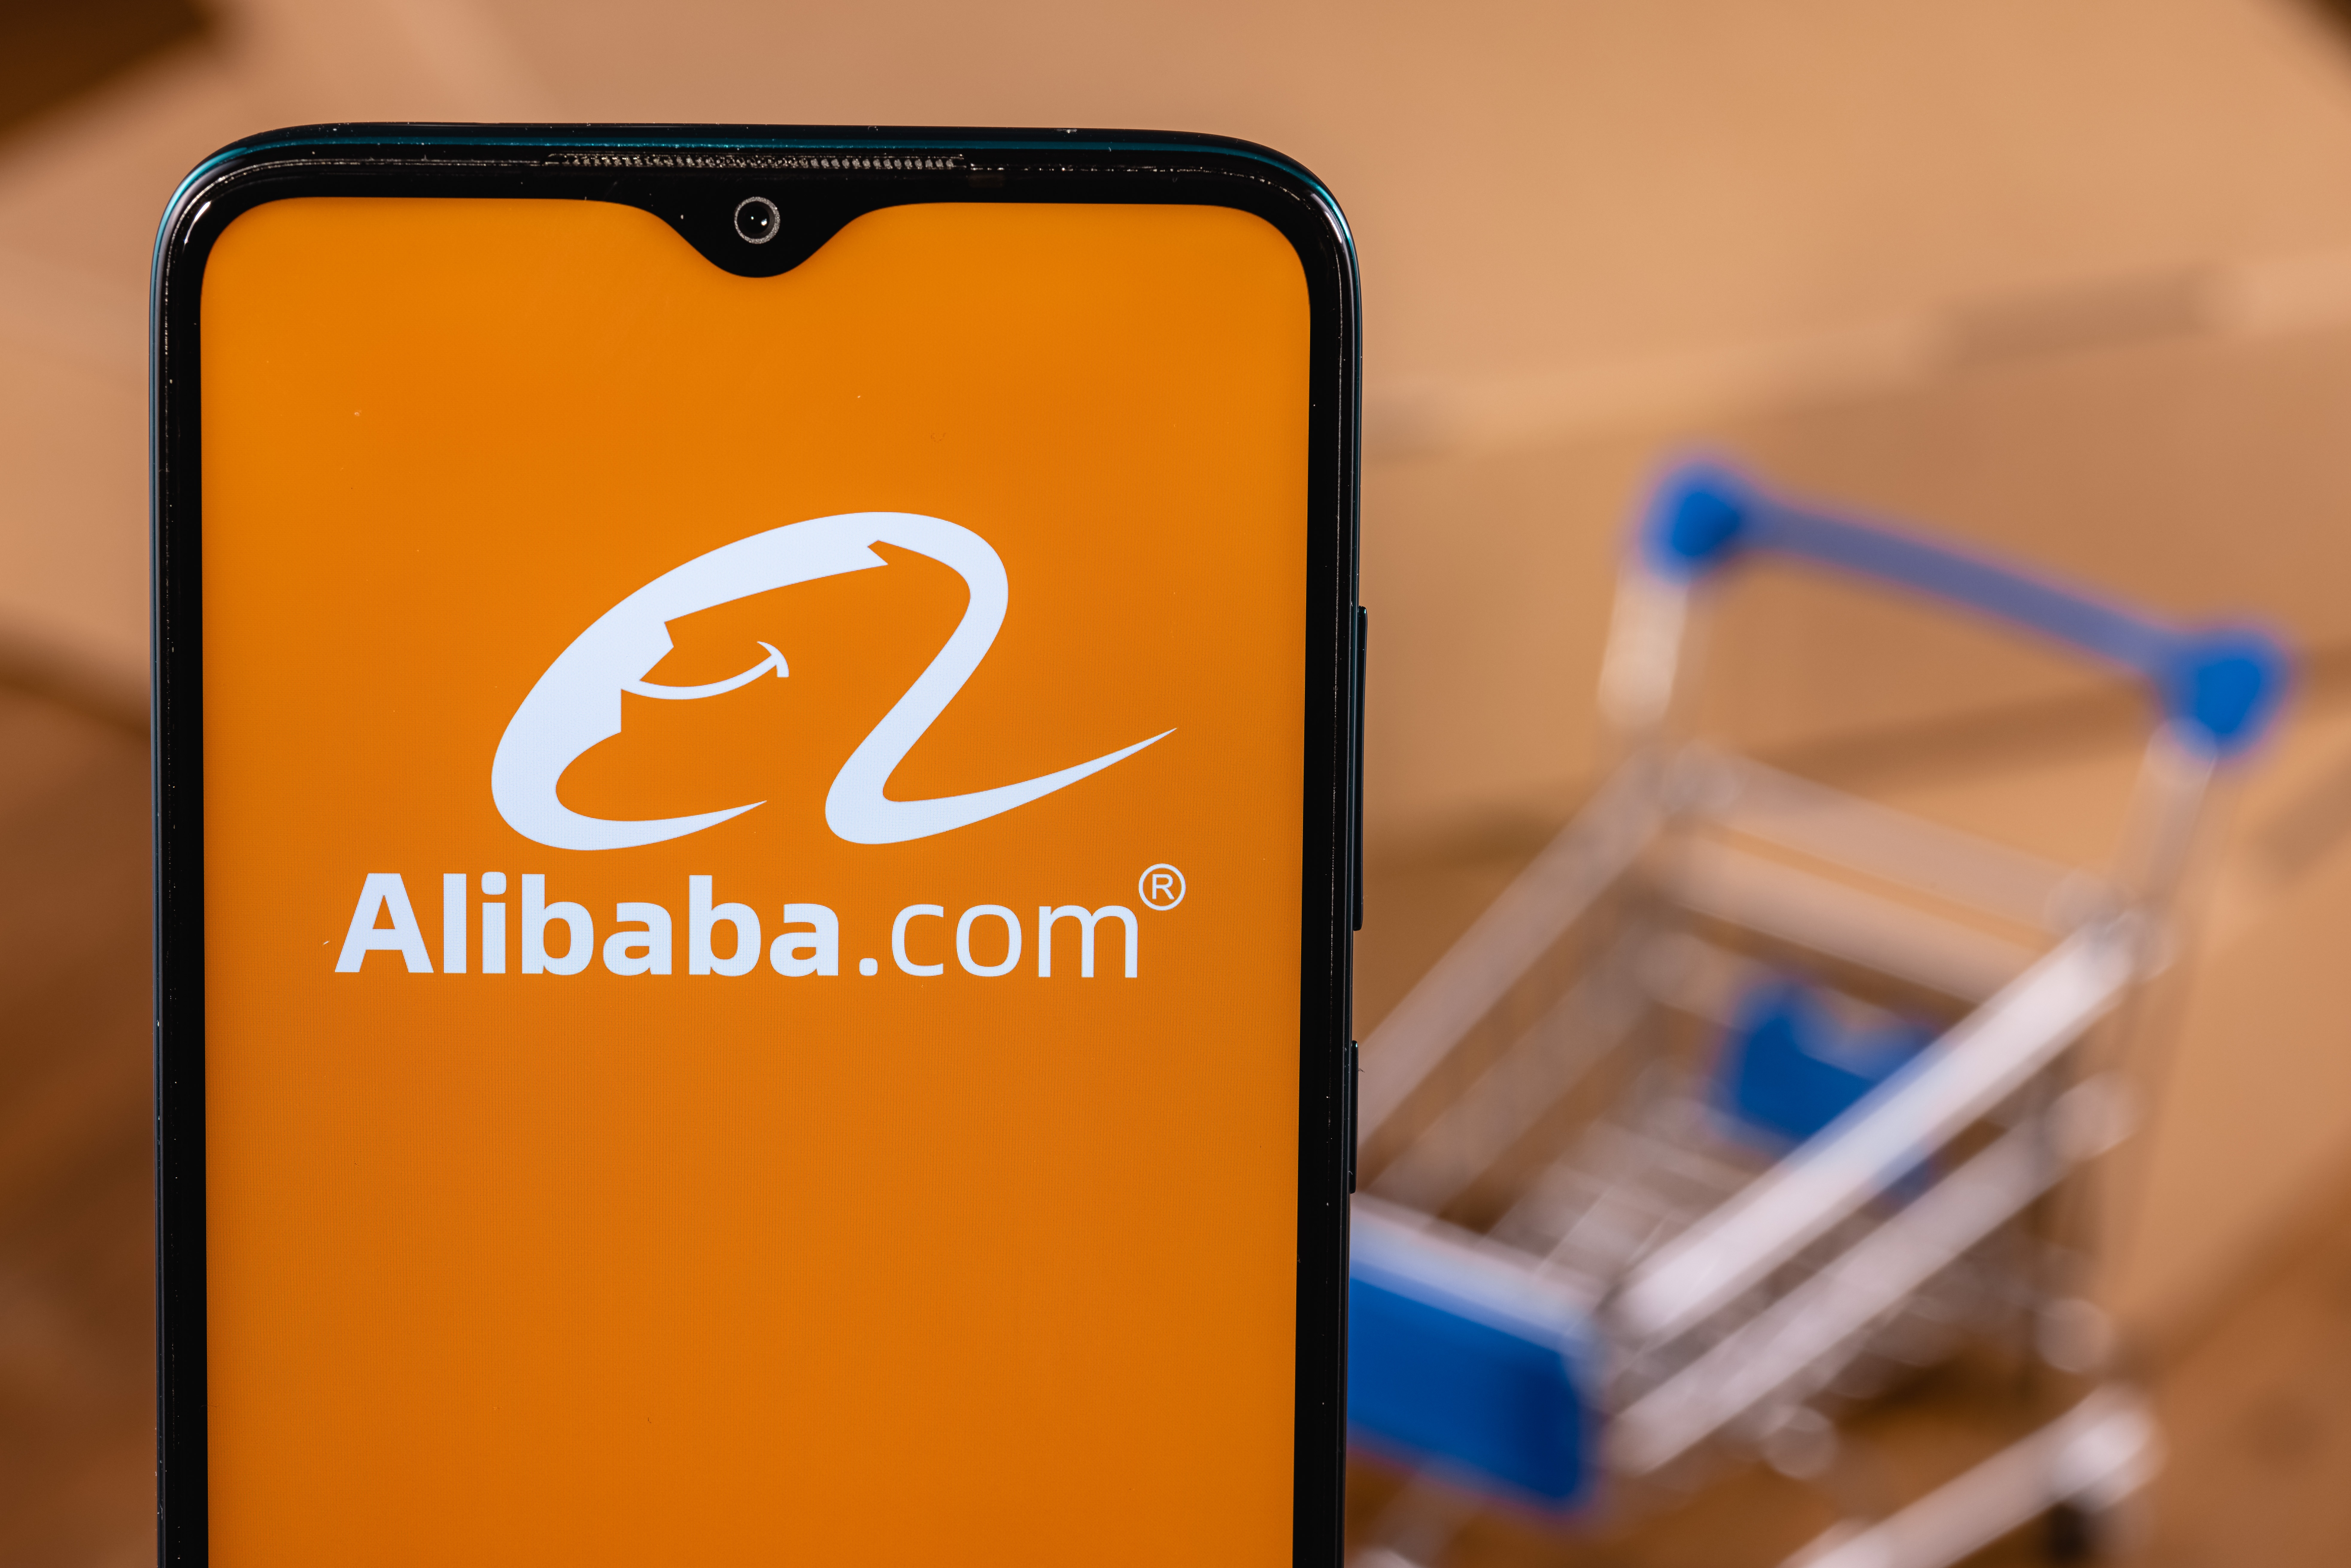 Alibaba's InTime arm owns 100 stores and malls. Photo: Shutterstock